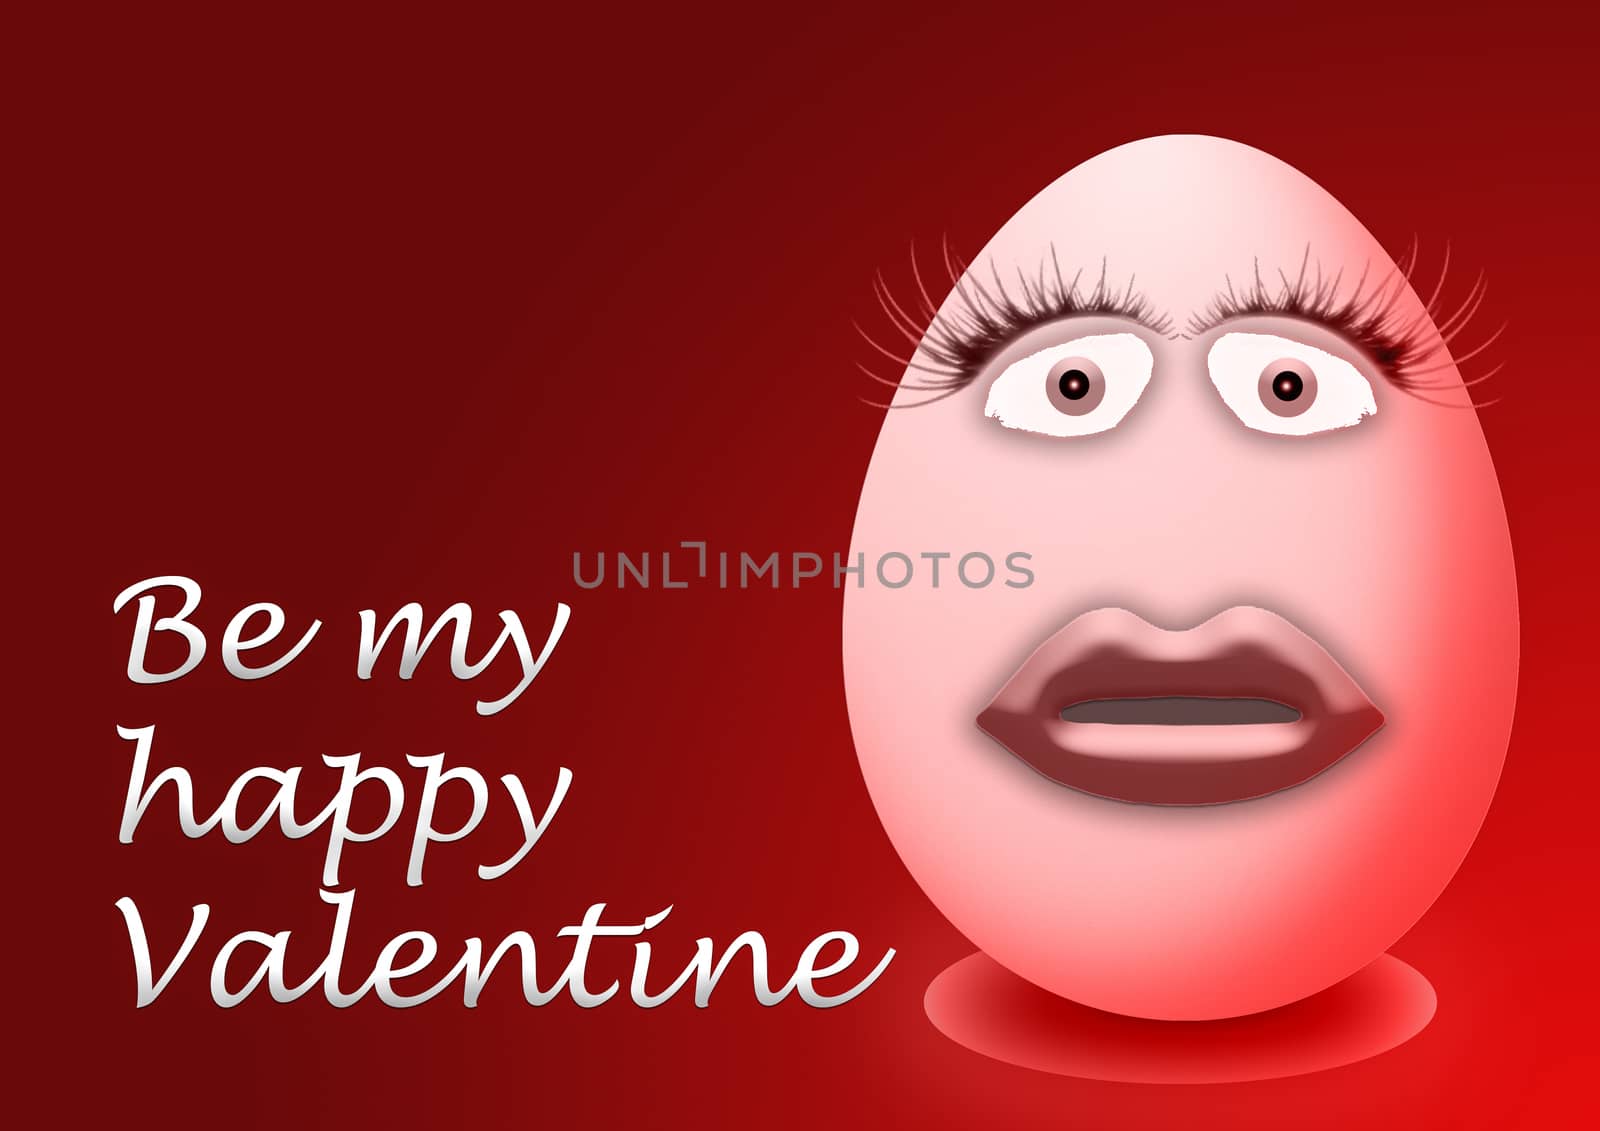 happy valentines day funny egg face